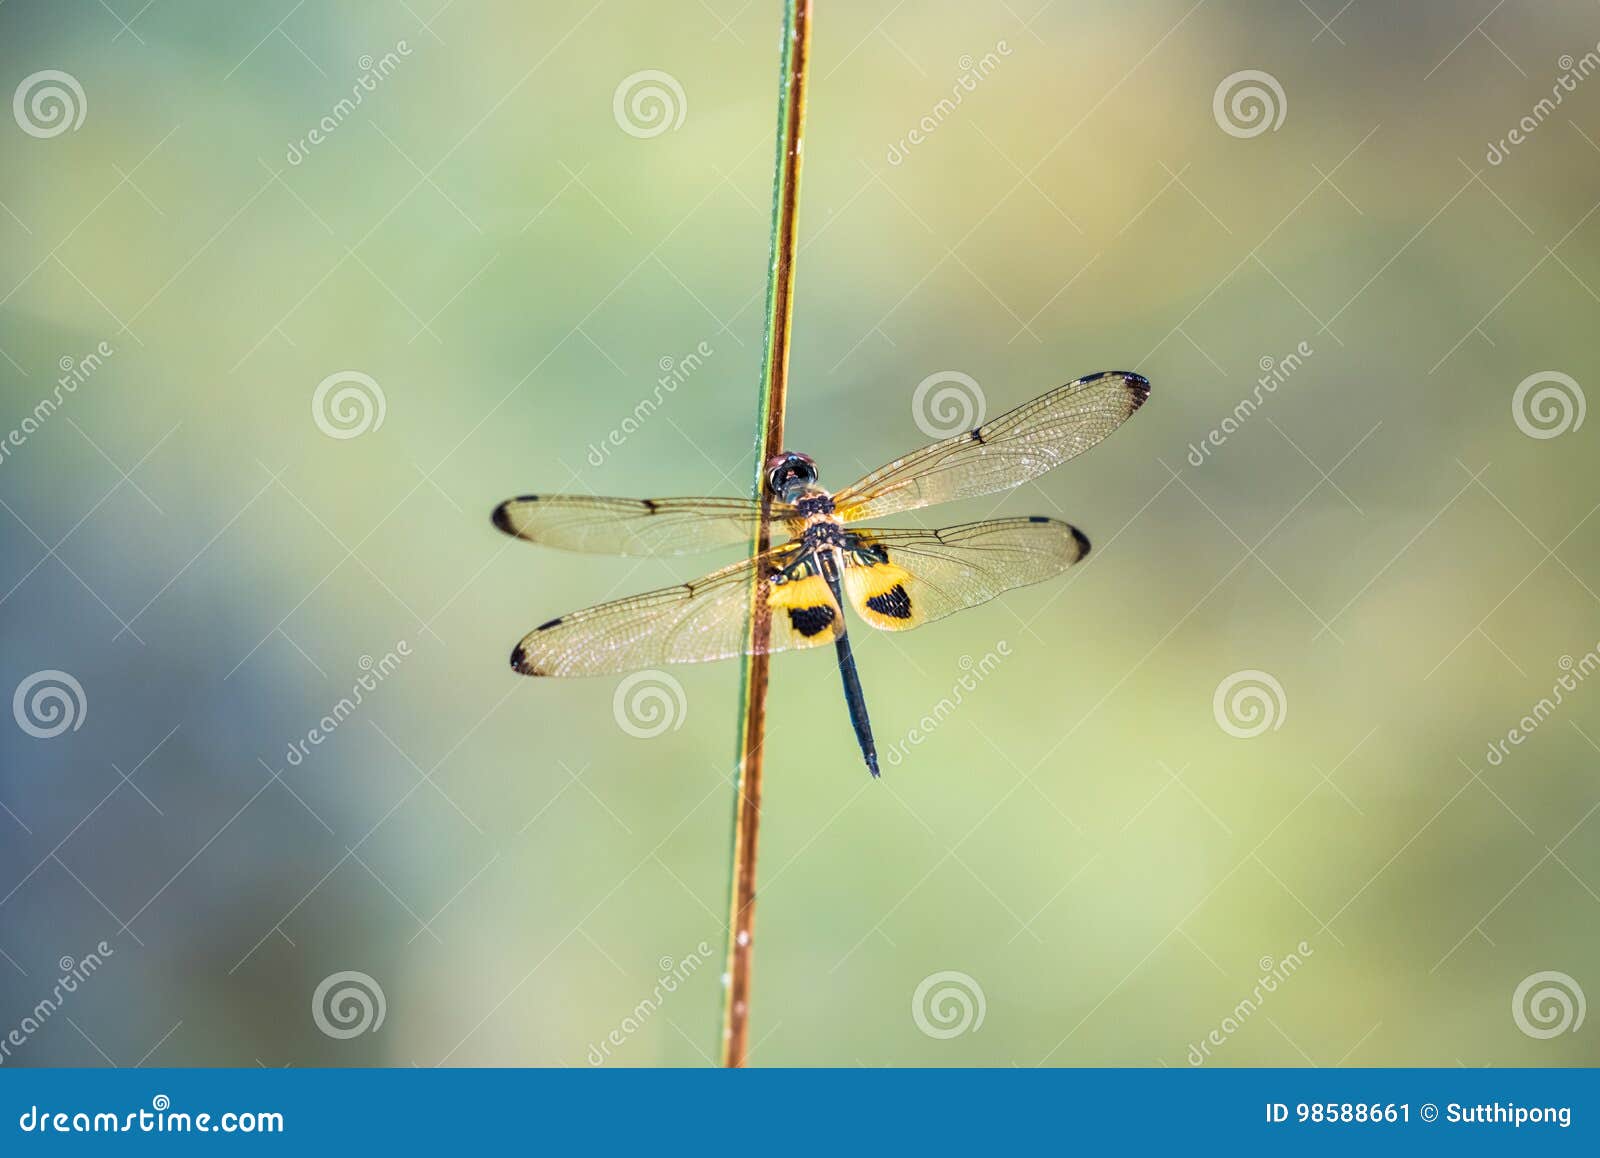 dragonfly resting on a branch.